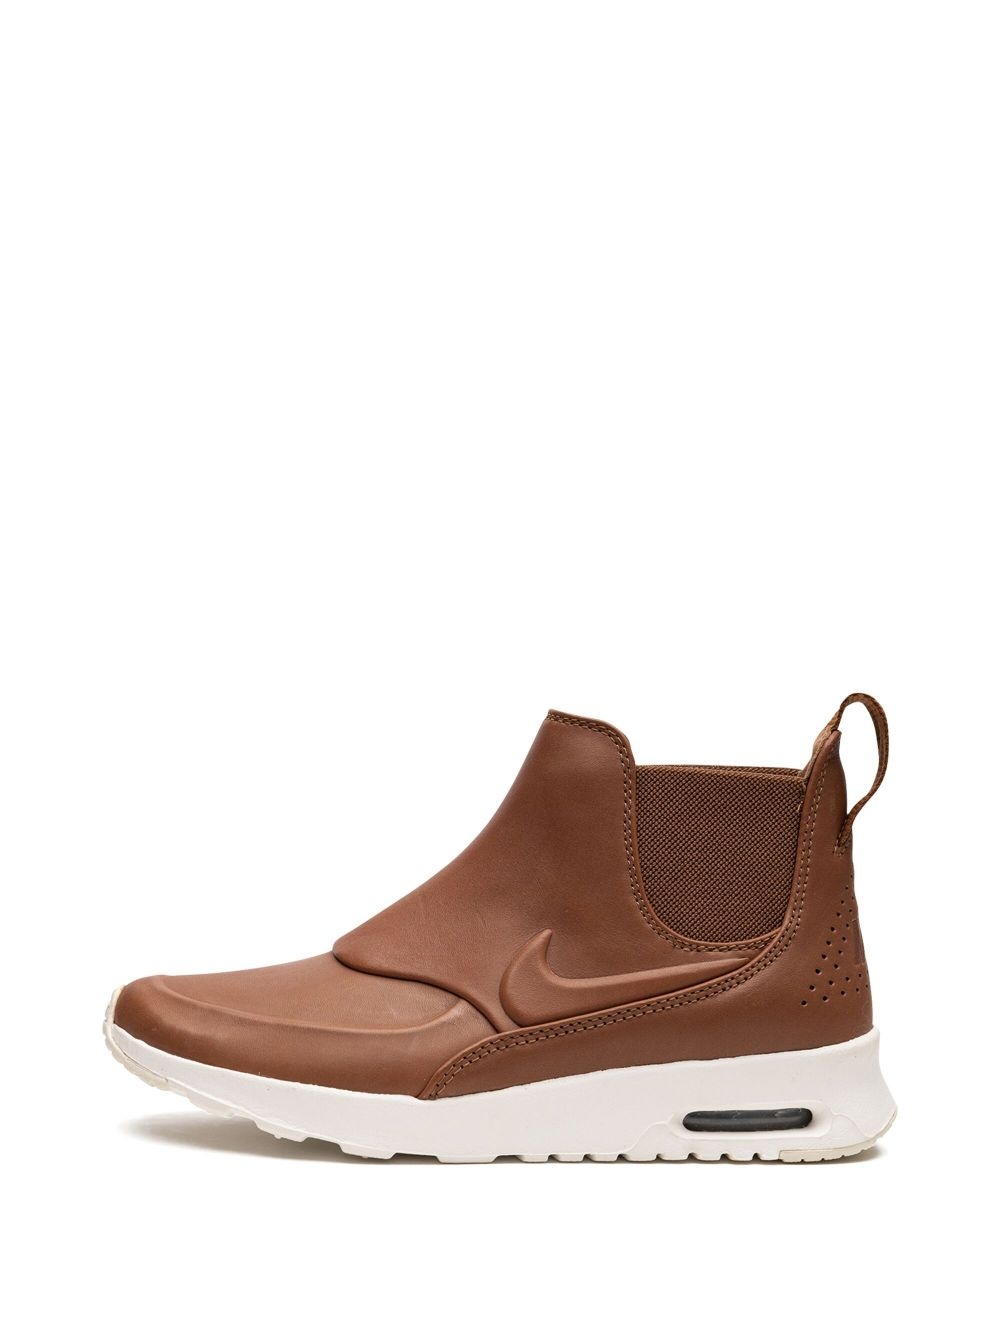 Air Max Thea Mid "Ale Brown" sneakers - 5